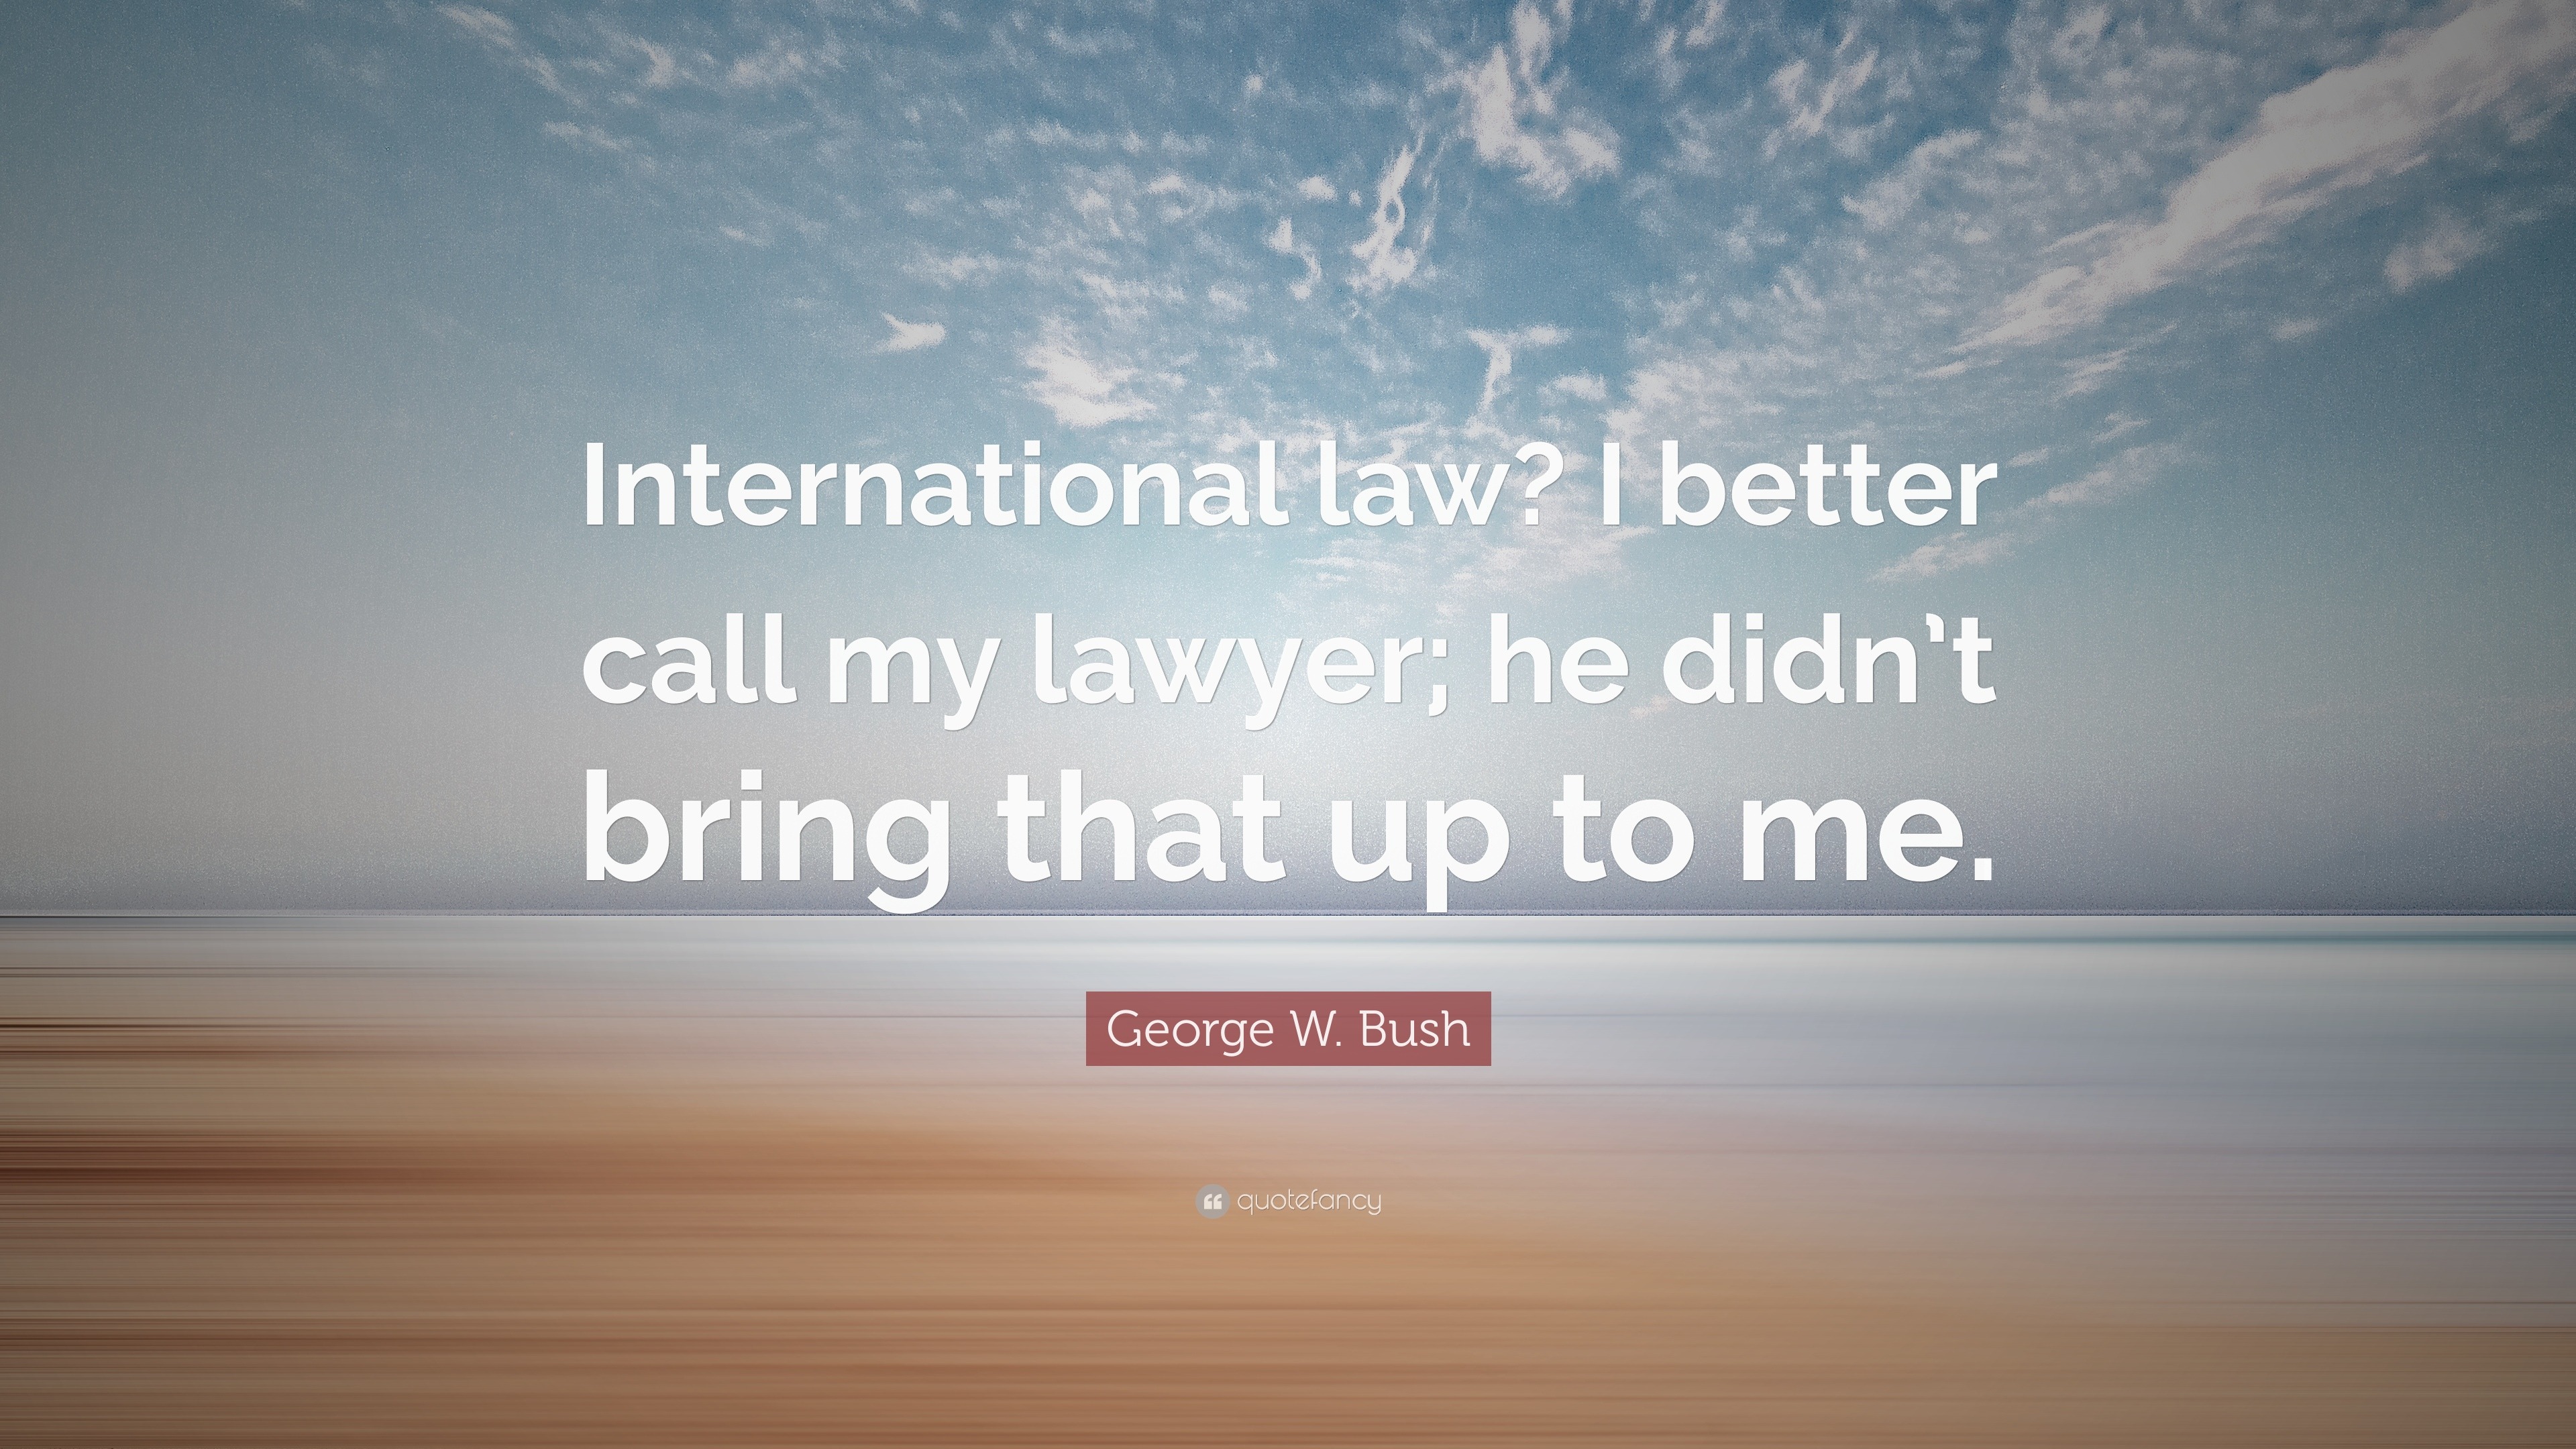 George W. Bush Quote: “International law? I better call my lawyer; he